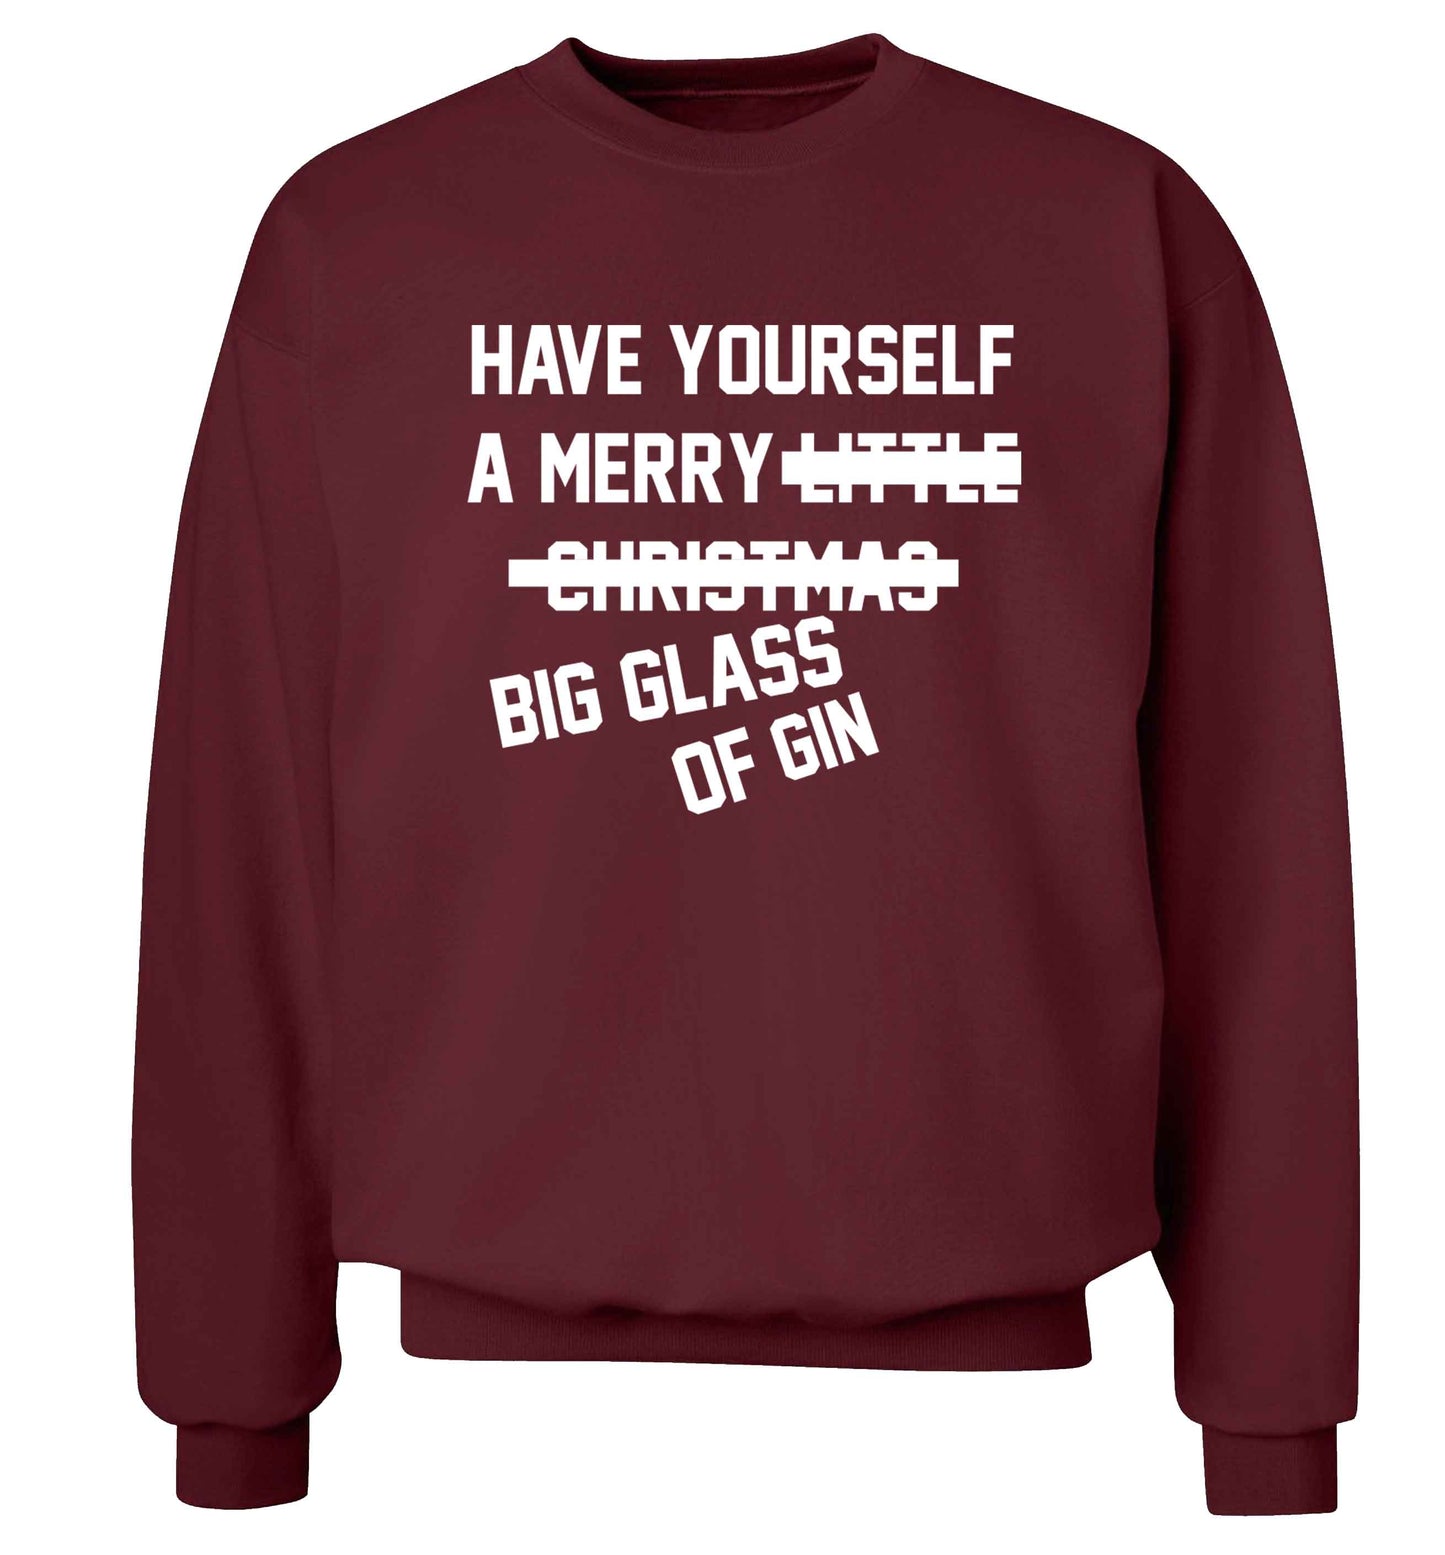 Have yourself a merry big glass of gin Adult's unisex maroon Sweater 2XL